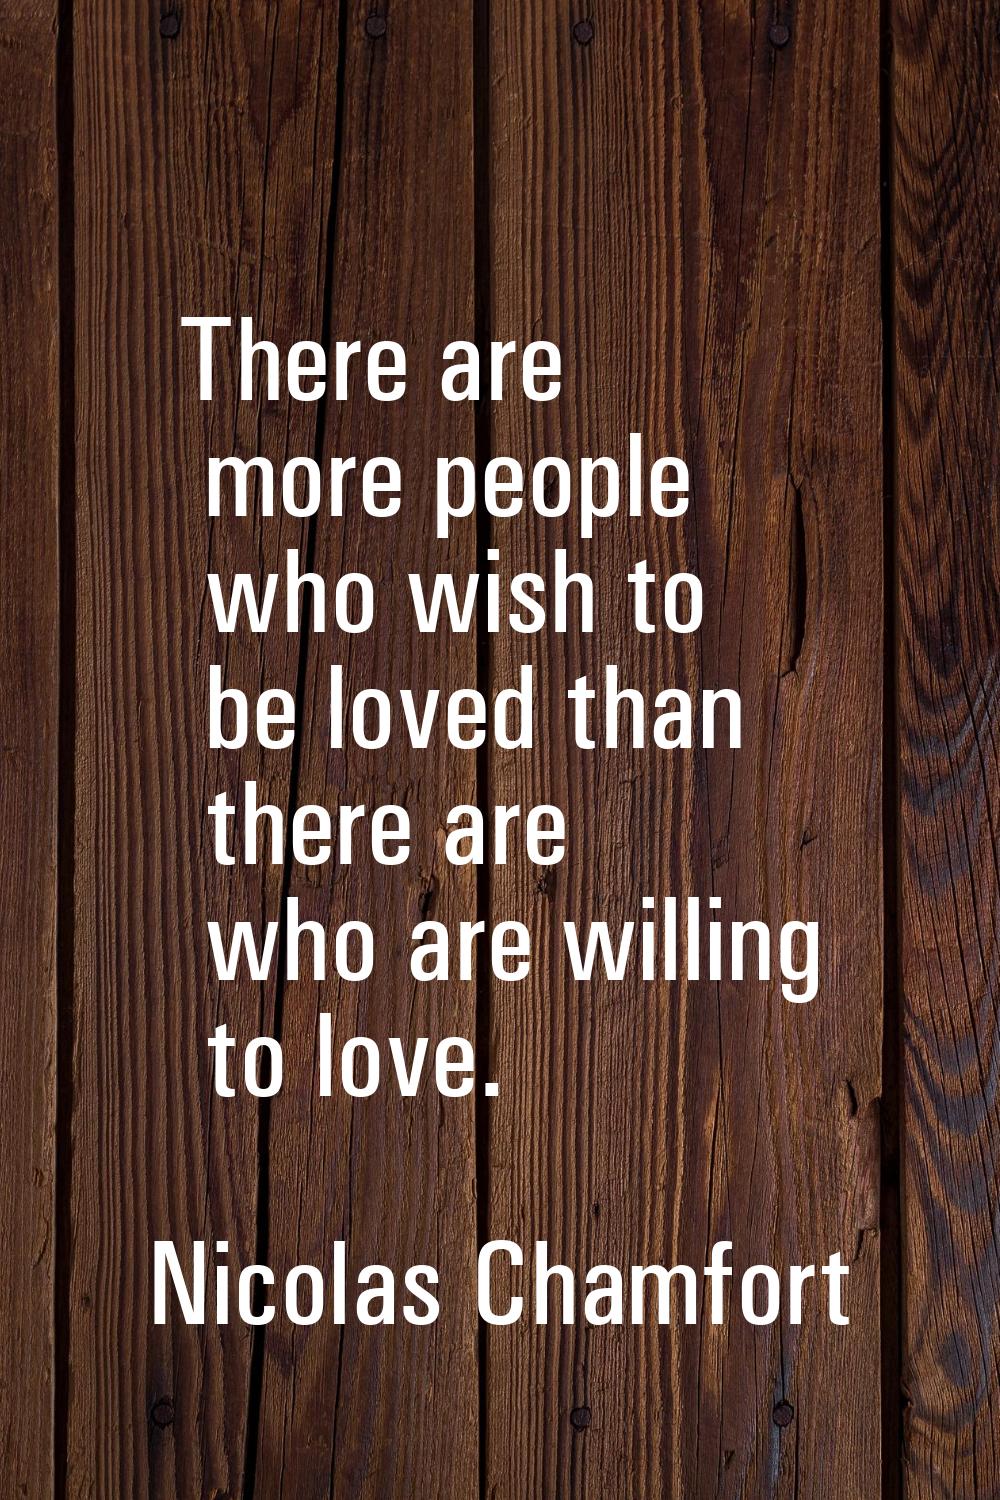 There are more people who wish to be loved than there are who are willing to love.